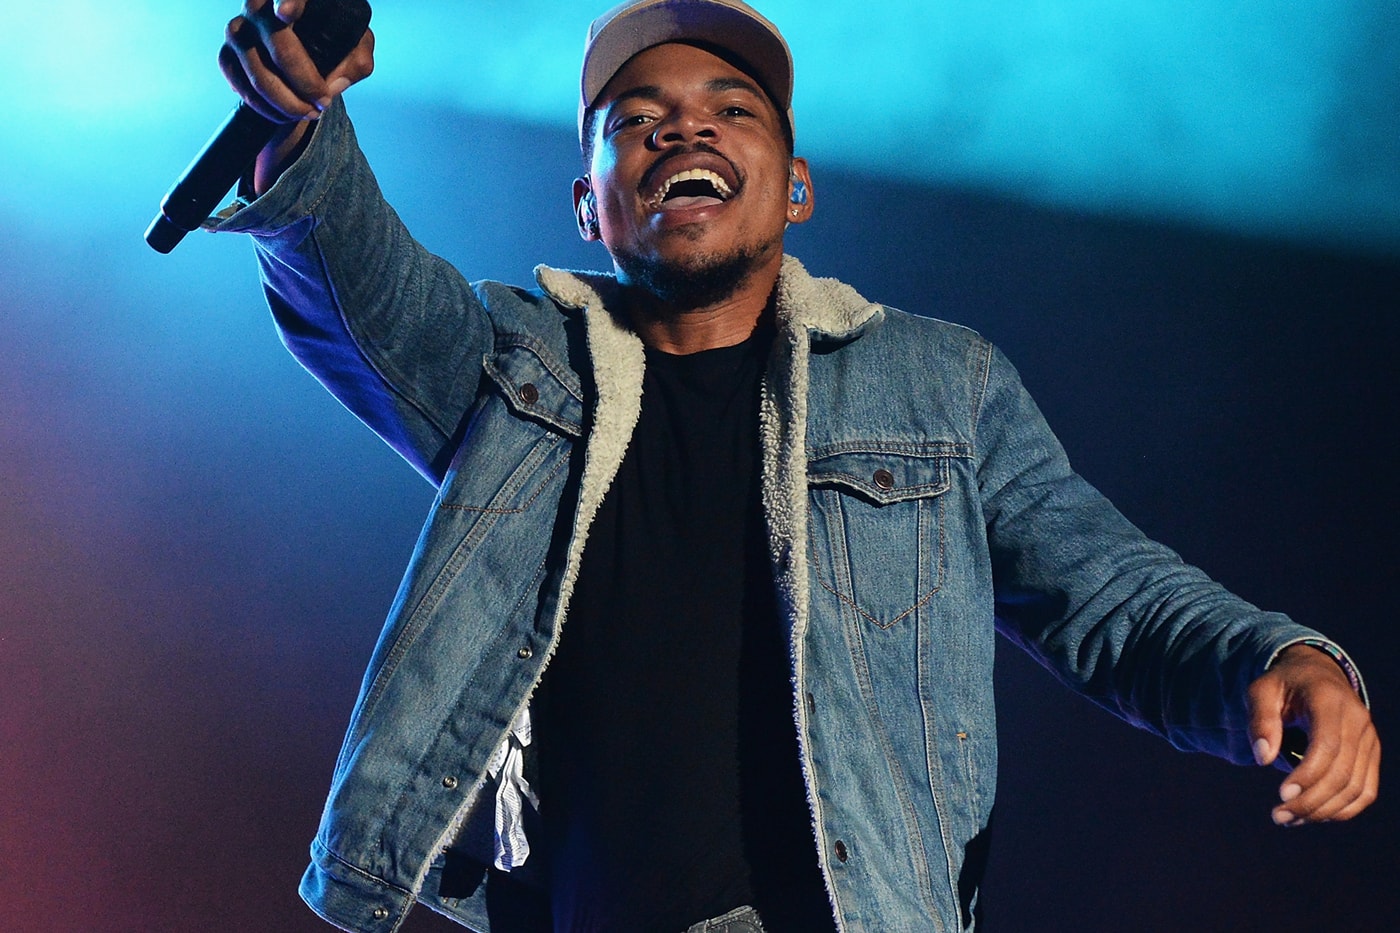 Chance The Rapper SoundCloud Is Here to Stay Alex Ljung Conversation Tweet Twitter support partnership 3 concert performance stage